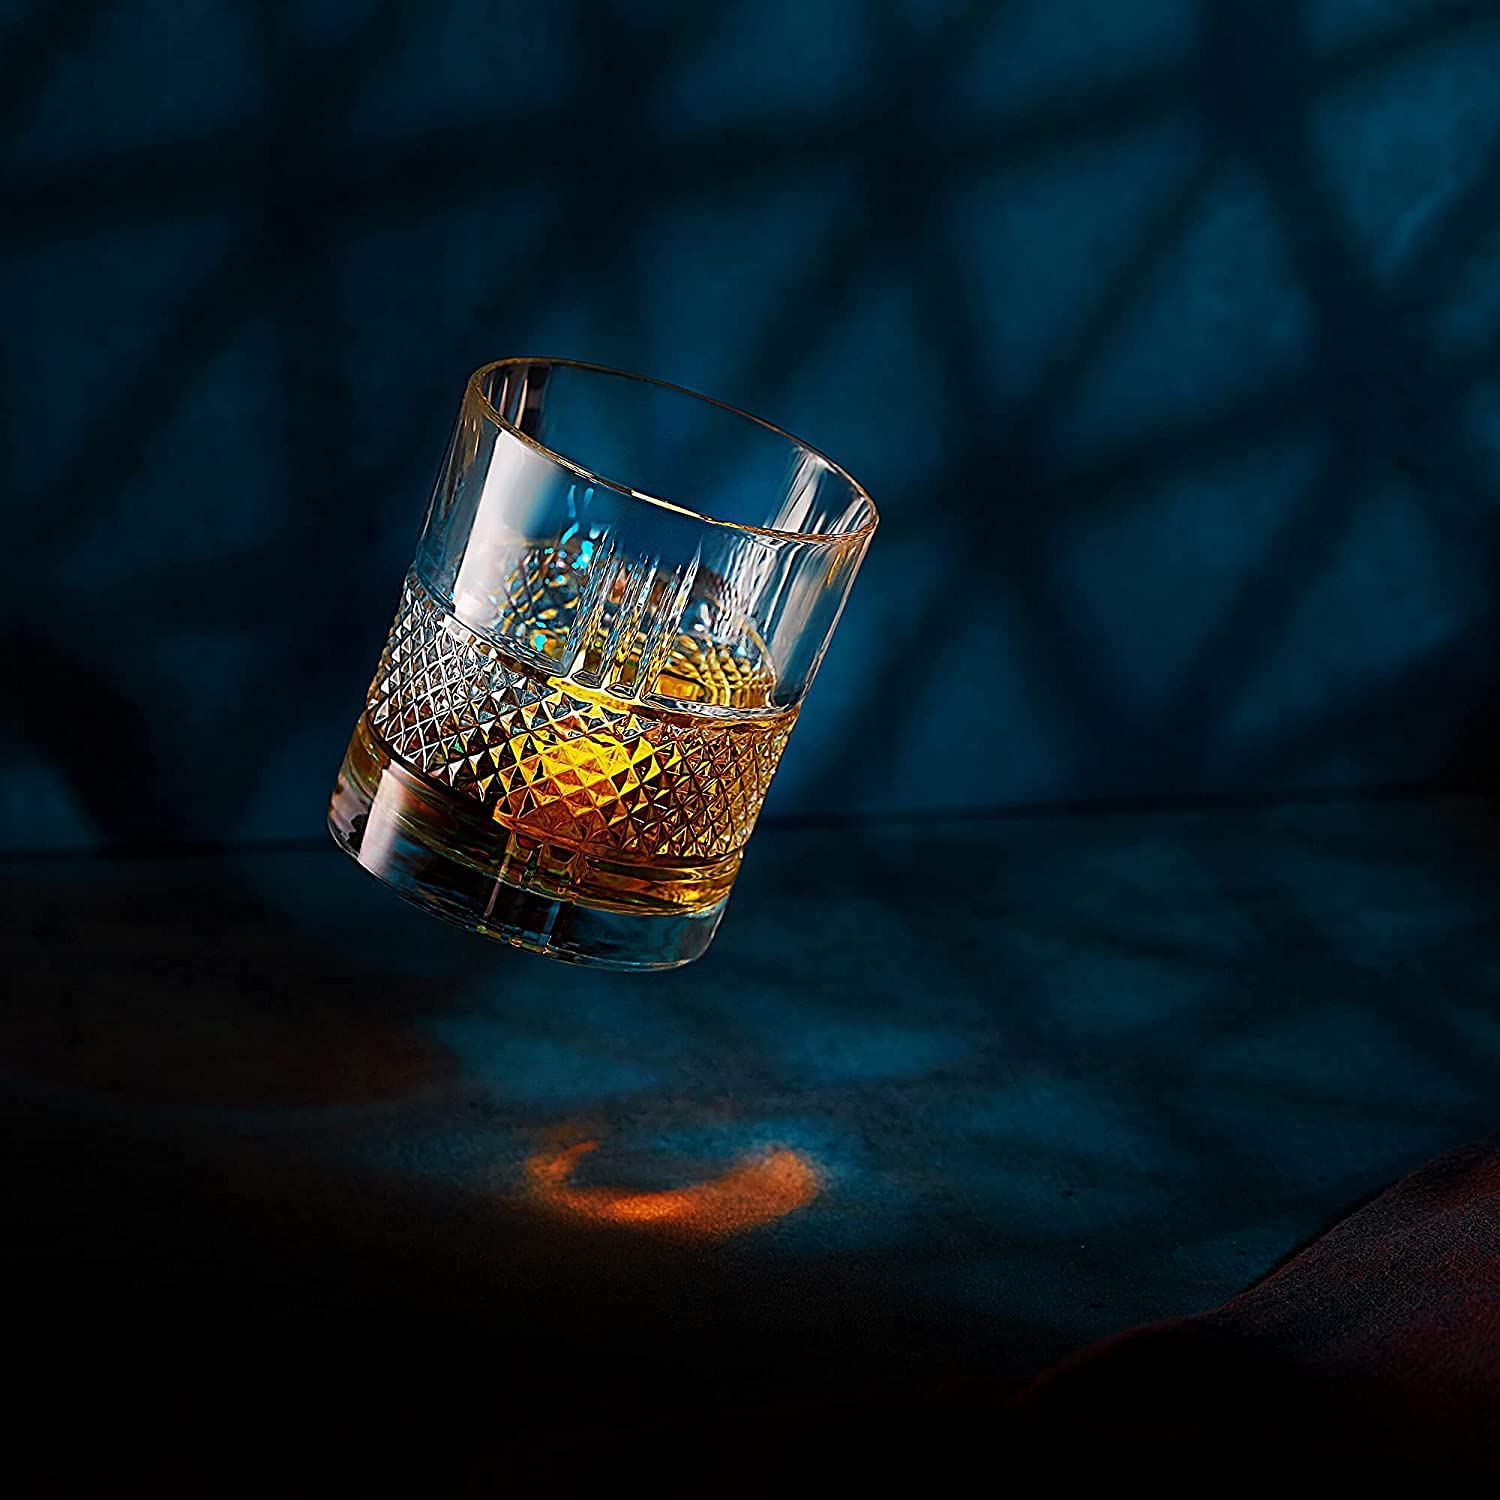 The Connoisseur's Set - Whiskey Stones & Reserve Whiskey Crystal Glass